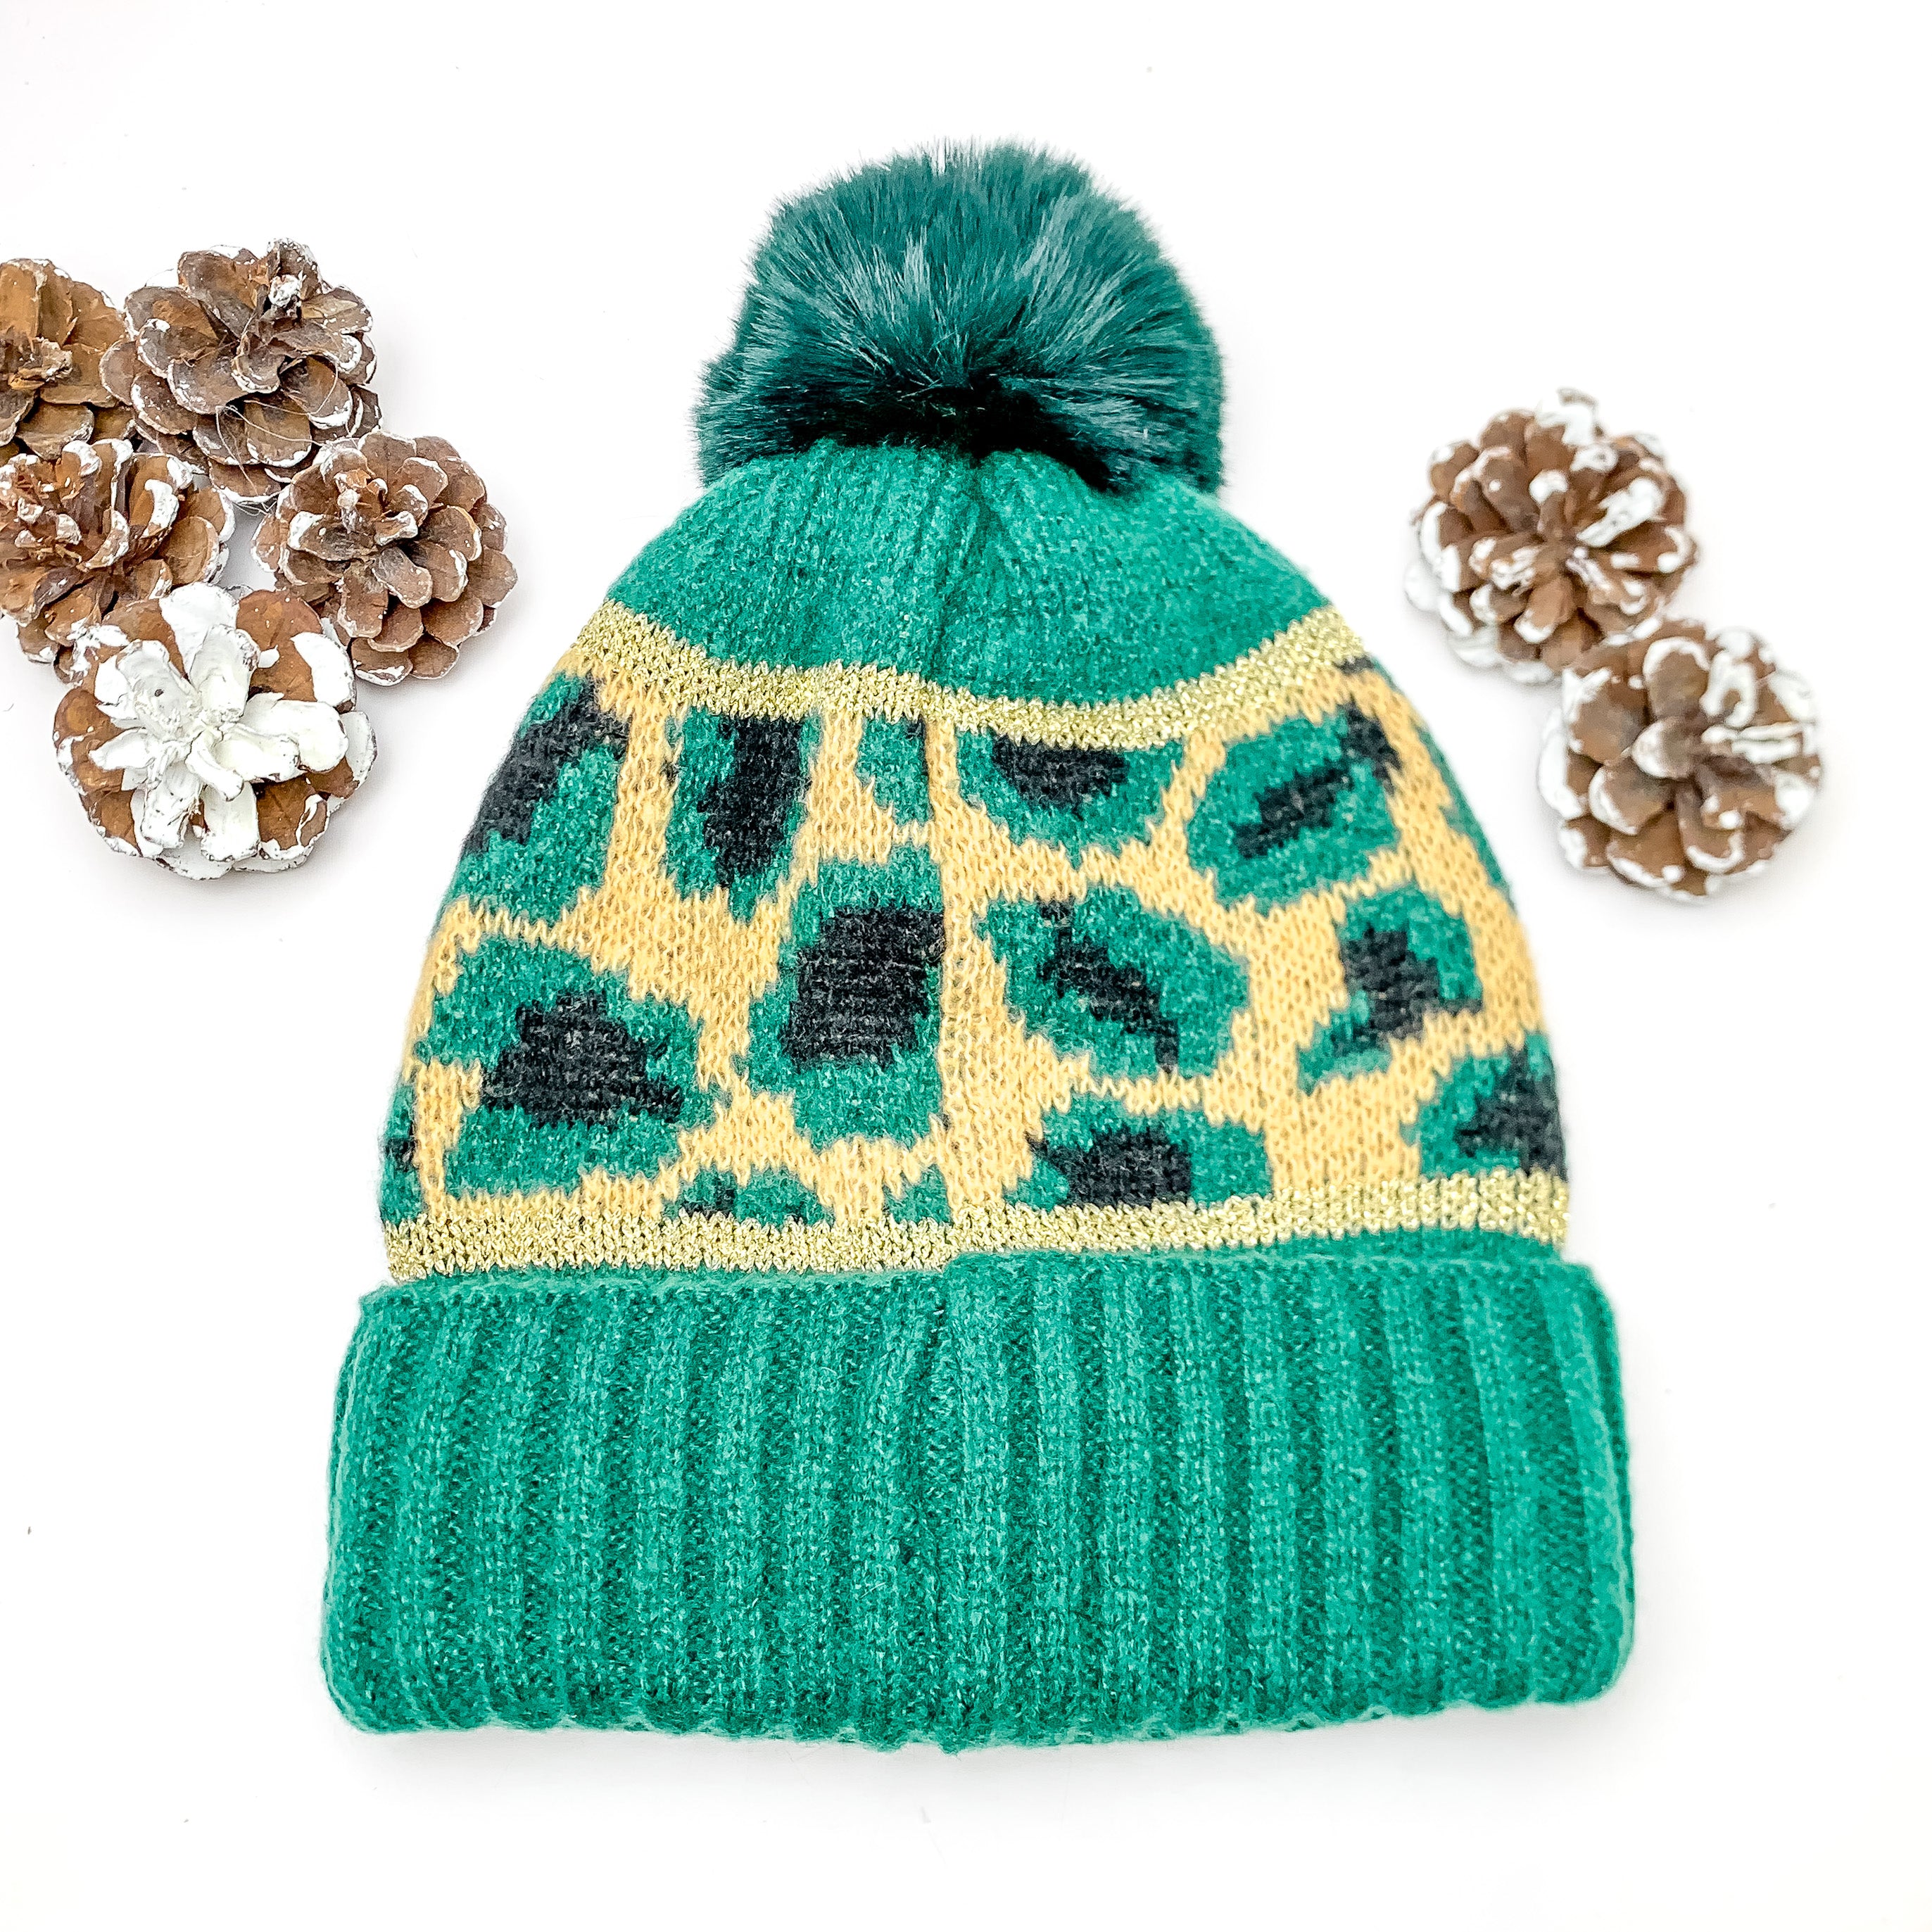 Lucky Leopard Beanie in Forest Green and Beige. This beanie is pictured on a white background with pinecones surrounding it.